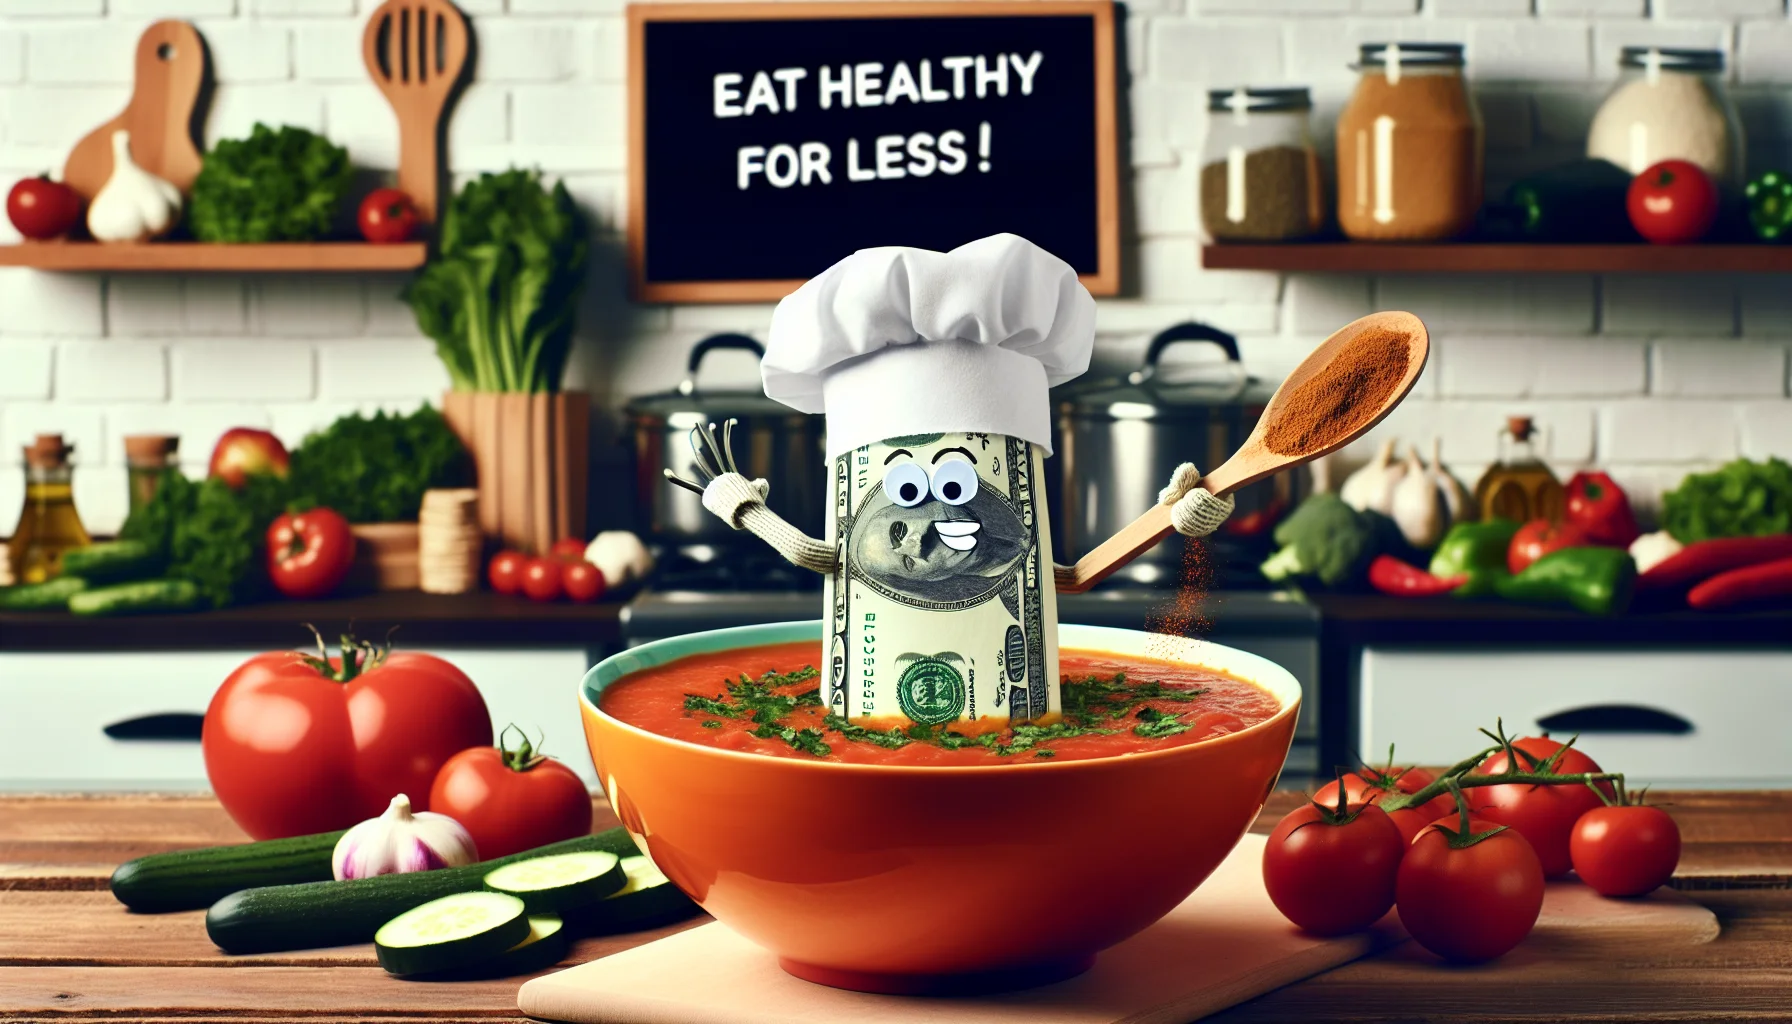 Create a lively and comical scene in a kitchen. In the foreground, a large vibrant bowl of tomato soup is being whisked by an animated dollar bill with expressive facial features. The dollar bill is wearing a chef's hat and apron, and is sprinkling a dash of spices into the soup. The background is filled with various other cost-effective and healthful ingredients like fresh vegetables, whole grains and herbs. A signboard hanging overhead reads, 'Eat Healthy for Less!'. Make the scene as appealing and inviting as possible to encourage viewers towards budget-friendly and healthy eating.